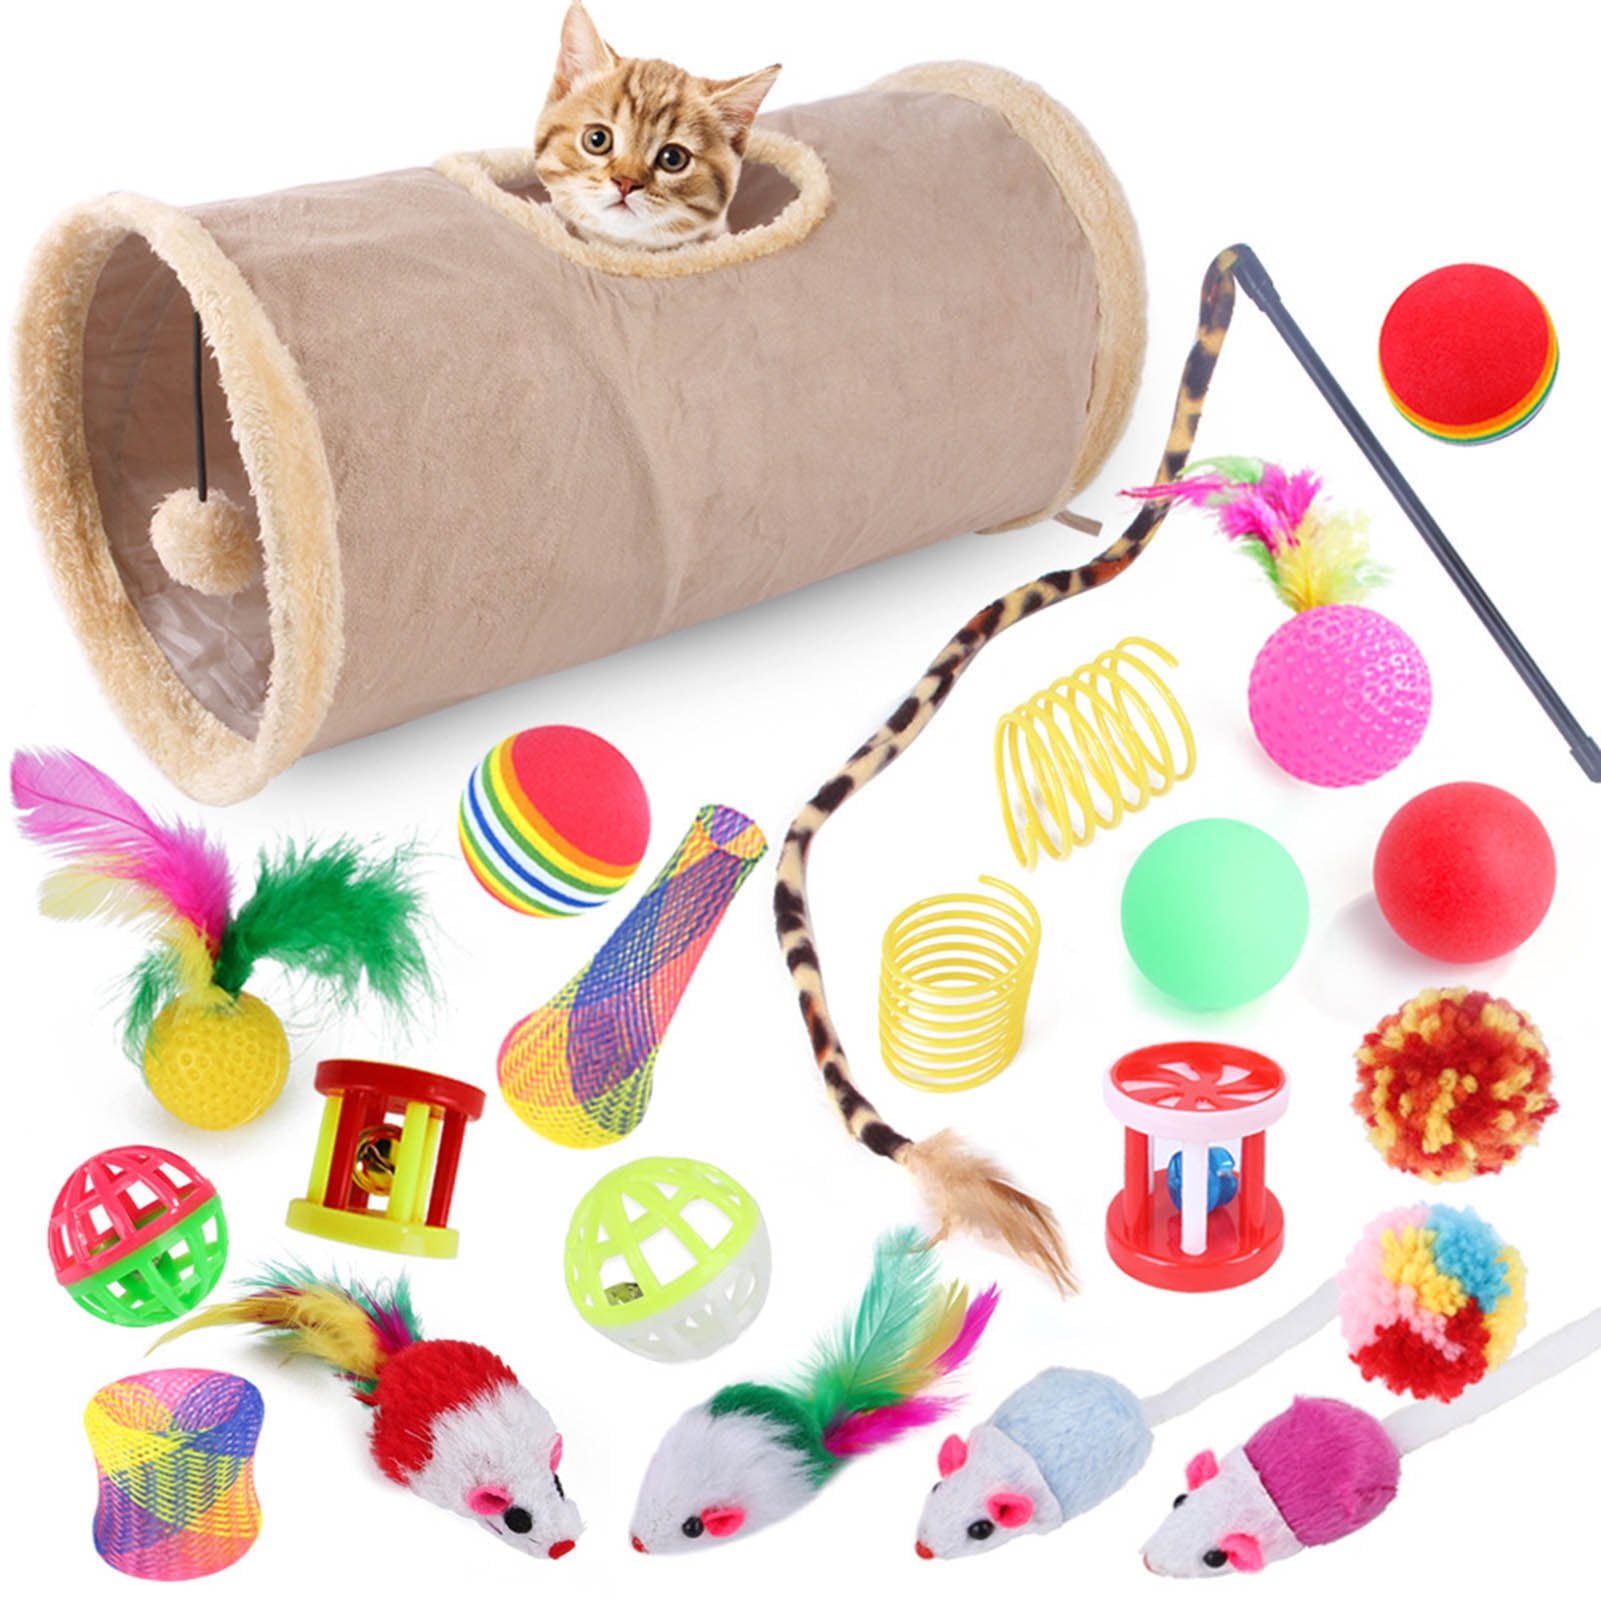 Youngever 15 Cat Toys Kitten Toys Assortments, Cat Crinkle Play Mat, Cat  Teaser Wand Interactive Toys Cat Springs, Crinkle Balls for Cat, Puppy